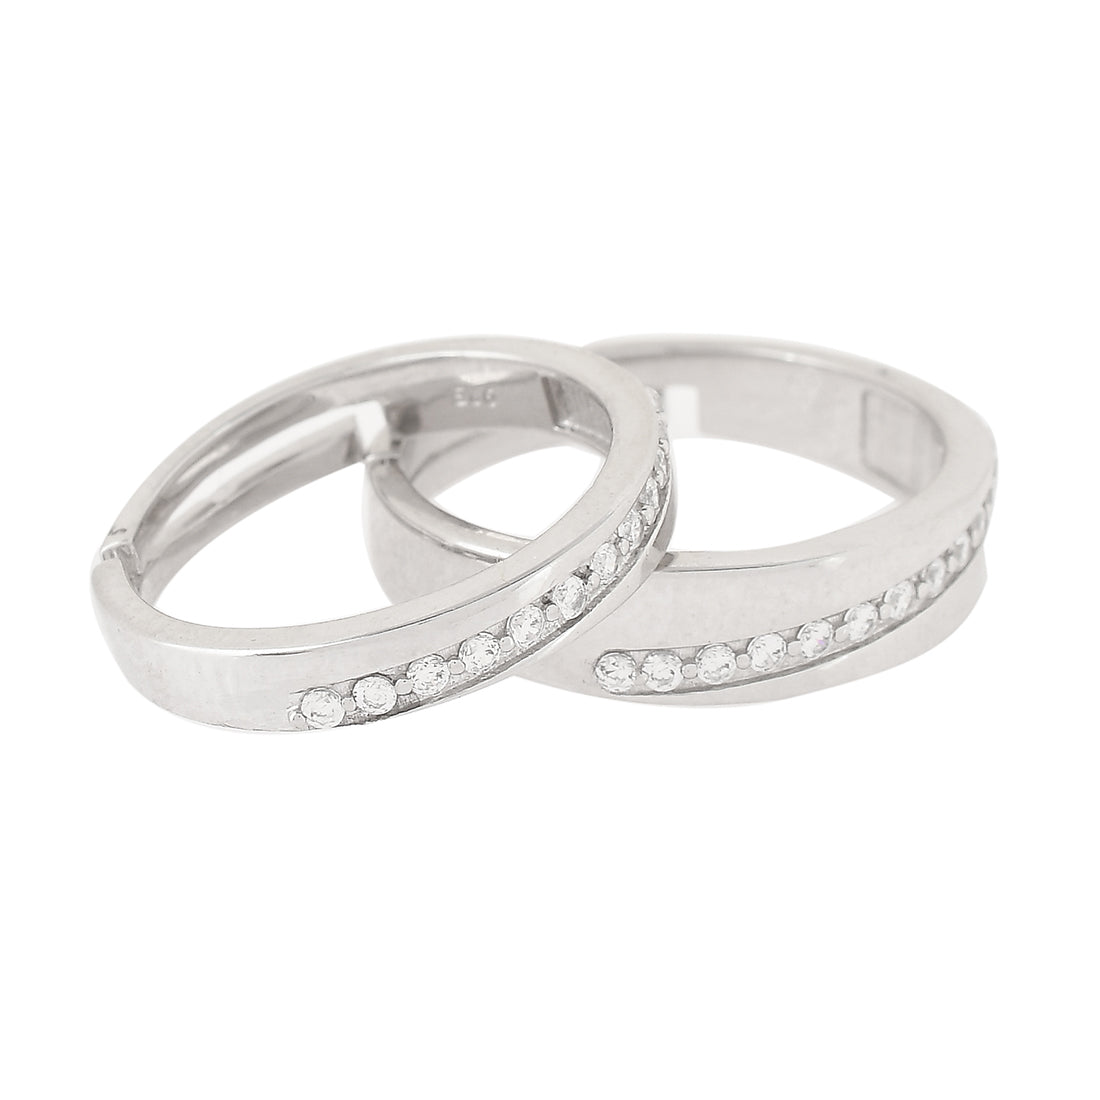 Sterling Silver CZ Couple Band Rings